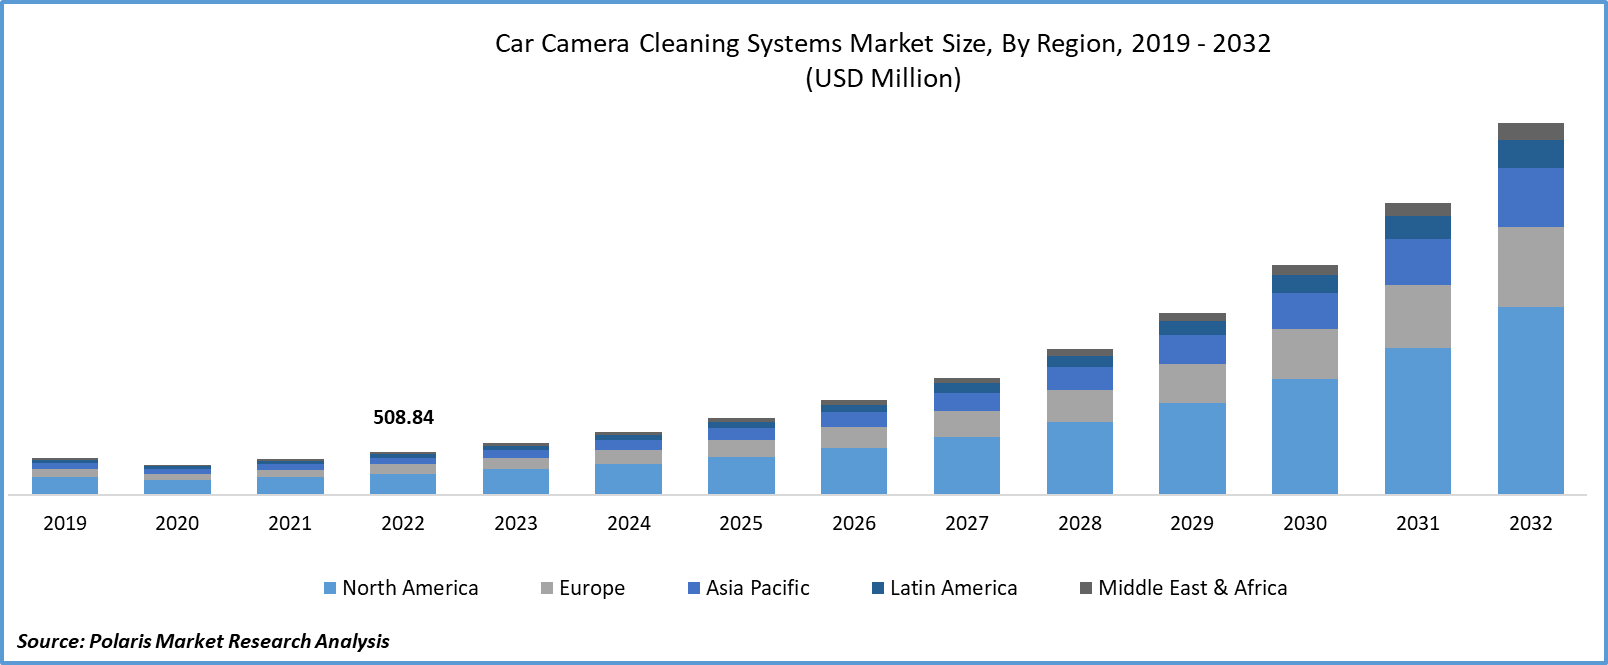 Car Camera Cleaning Systems Market Size